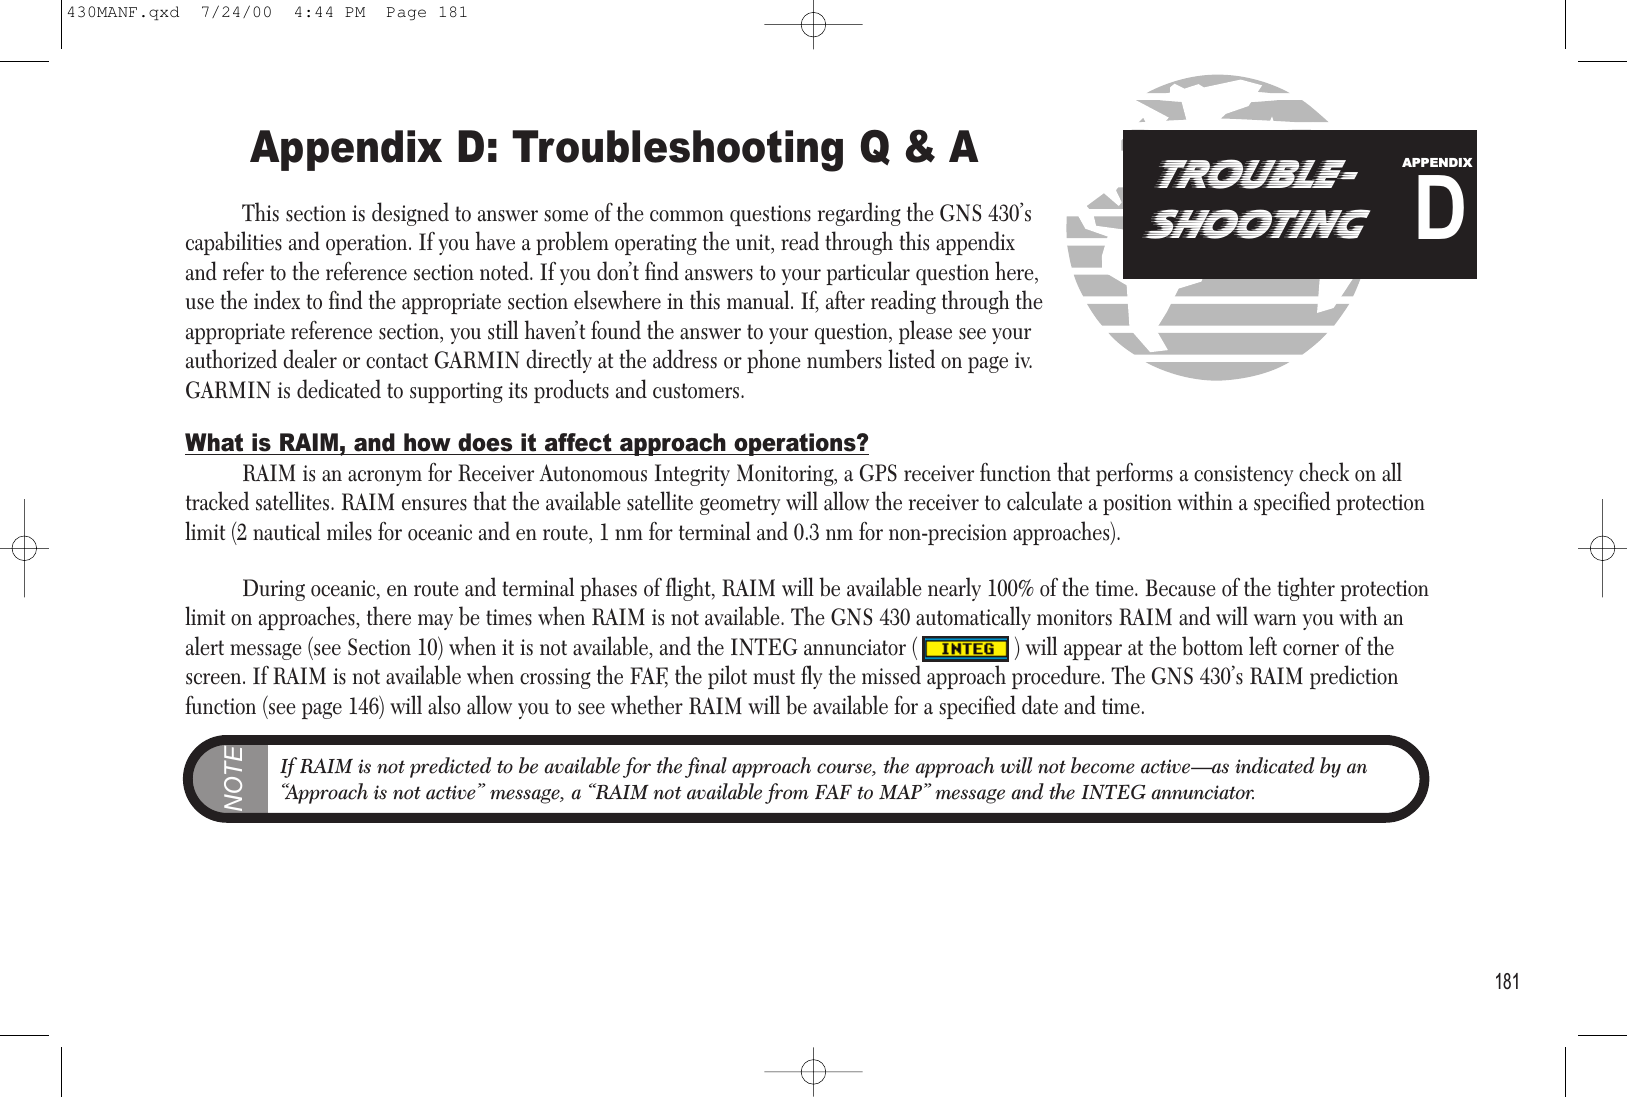 Appendix D: Troubleshooting Q &amp; AThis section is designed to answer some of the common questions regarding the GNS 430’scapabilities and operation. If you have a problem operating the unit, read through this appendixand refer to the reference section noted. If you don’t find answers to your particular question here,use the index to find the appropriate section elsewhere in this manual. If, after reading through theappropriate reference section, you still haven’t found the answer to your question, please see yourauthorized dealer or contact GARMIN directly at the address or phone numbers listed on page iv.GARMIN is dedicated to supporting its products and customers.What is RAIM, and how does it affect approach operations?RAIM is an acronym for Receiver Autonomous Integrity Monitoring, a GPS receiver function that performs a consistency check on alltracked satellites. RAIM ensures that the available satellite geometry will allow the receiver to calculate a position within a specified protectionlimit (2 nautical miles for oceanic and en route, 1 nm for terminal and 0.3 nm for non-precision approaches).During oceanic, en route and terminal phases of flight, RAIM will be available nearly 100% of the time. Because of the tighter protectionlimit on approaches, there may be times when RAIM is not available. The GNS 430 automatically monitors RAIM and will warn you with analert message (see Section 10) when it is not available, and the INTEG annunciator (                 ) will appear at the bottom left corner of thescreen. If RAIM is not available when crossing the FAF, the pilot must fly the missed approach procedure. The GNS 430’s RAIM predictionfunction (see page 146) will also allow you to see whether RAIM will be available for a specified date and time.181TROUBLE-SHOOTINGDAPPENDIXNOTEIf RAIM is not predicted to be available for the final approach course, the approach will not become active—as indicated by an“Approach is not active” message, a “RAIM not available from FAF to MAP” message and the INTEG annunciator.430MANF.qxd  7/24/00  4:44 PM  Page 181